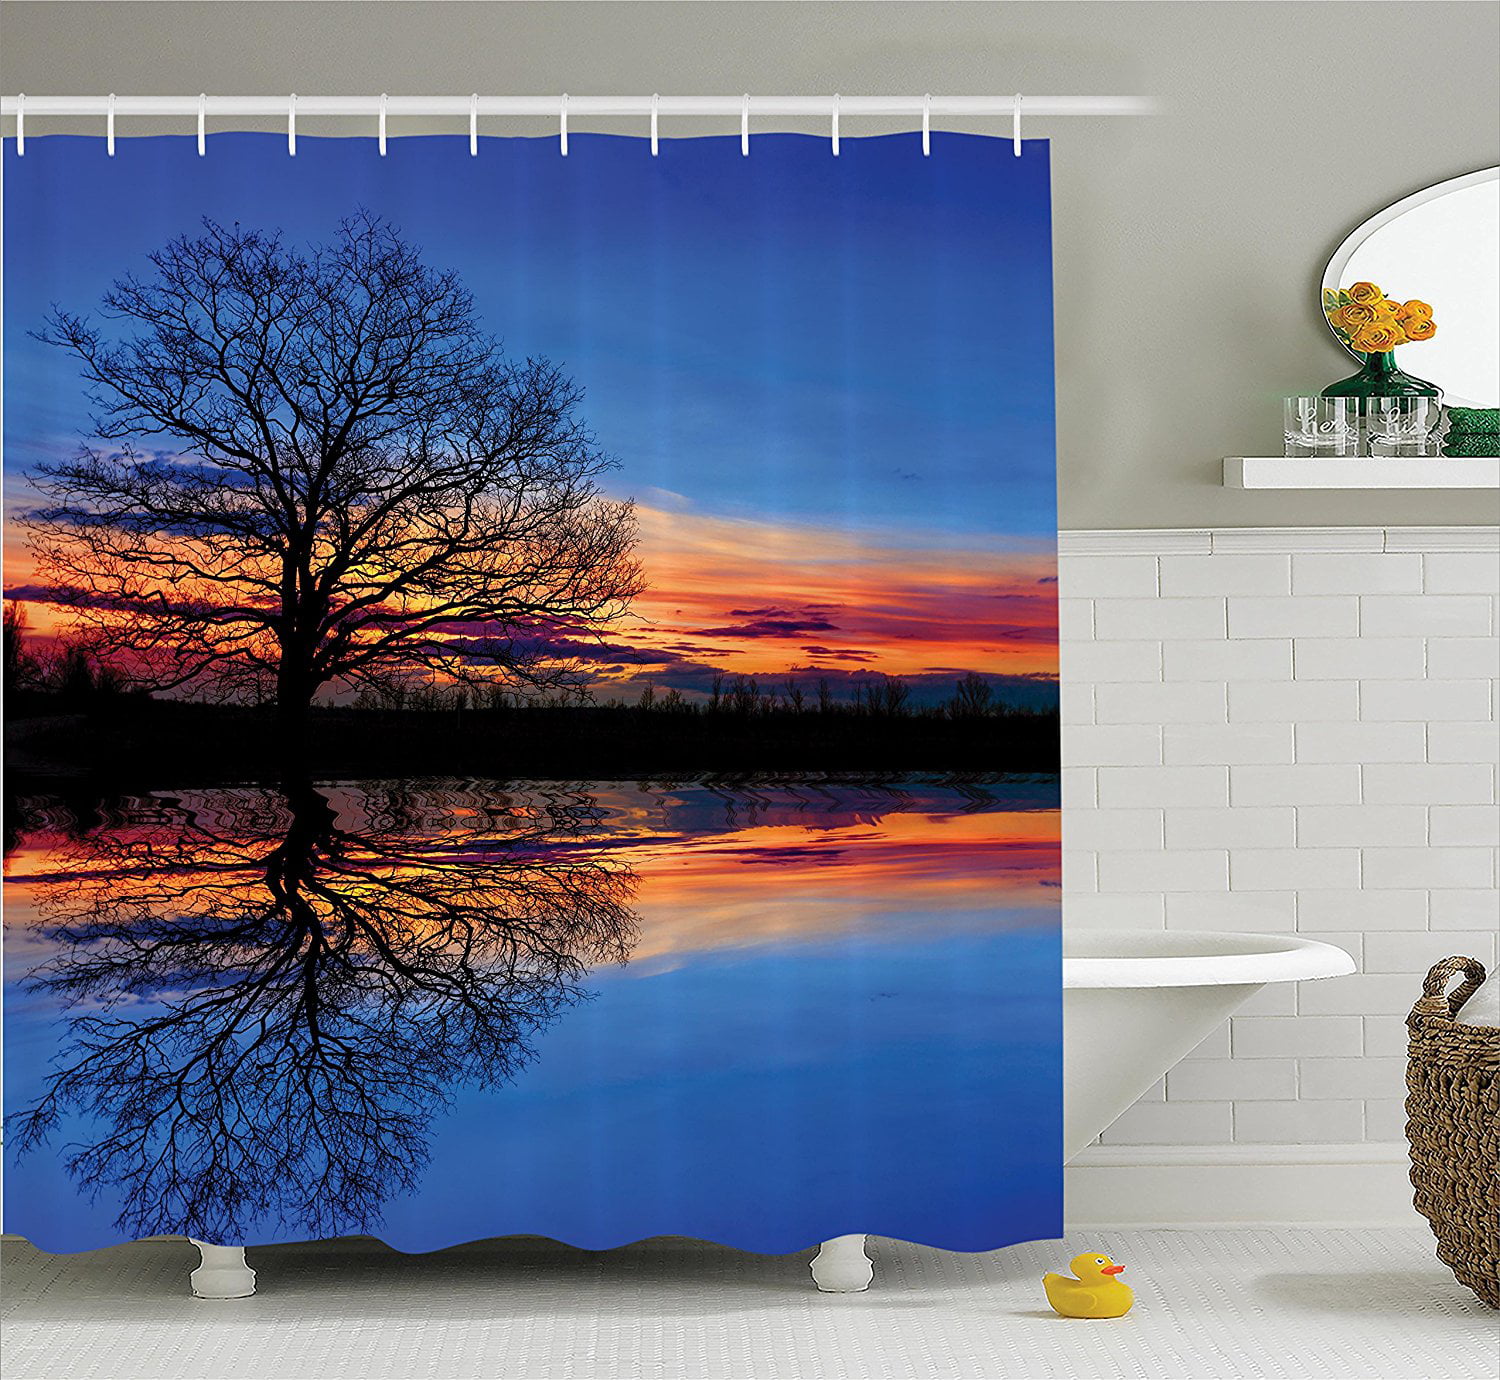 Details about   Ocean Shower Curtain Sunrise Water Reflection Print for Bathroom 